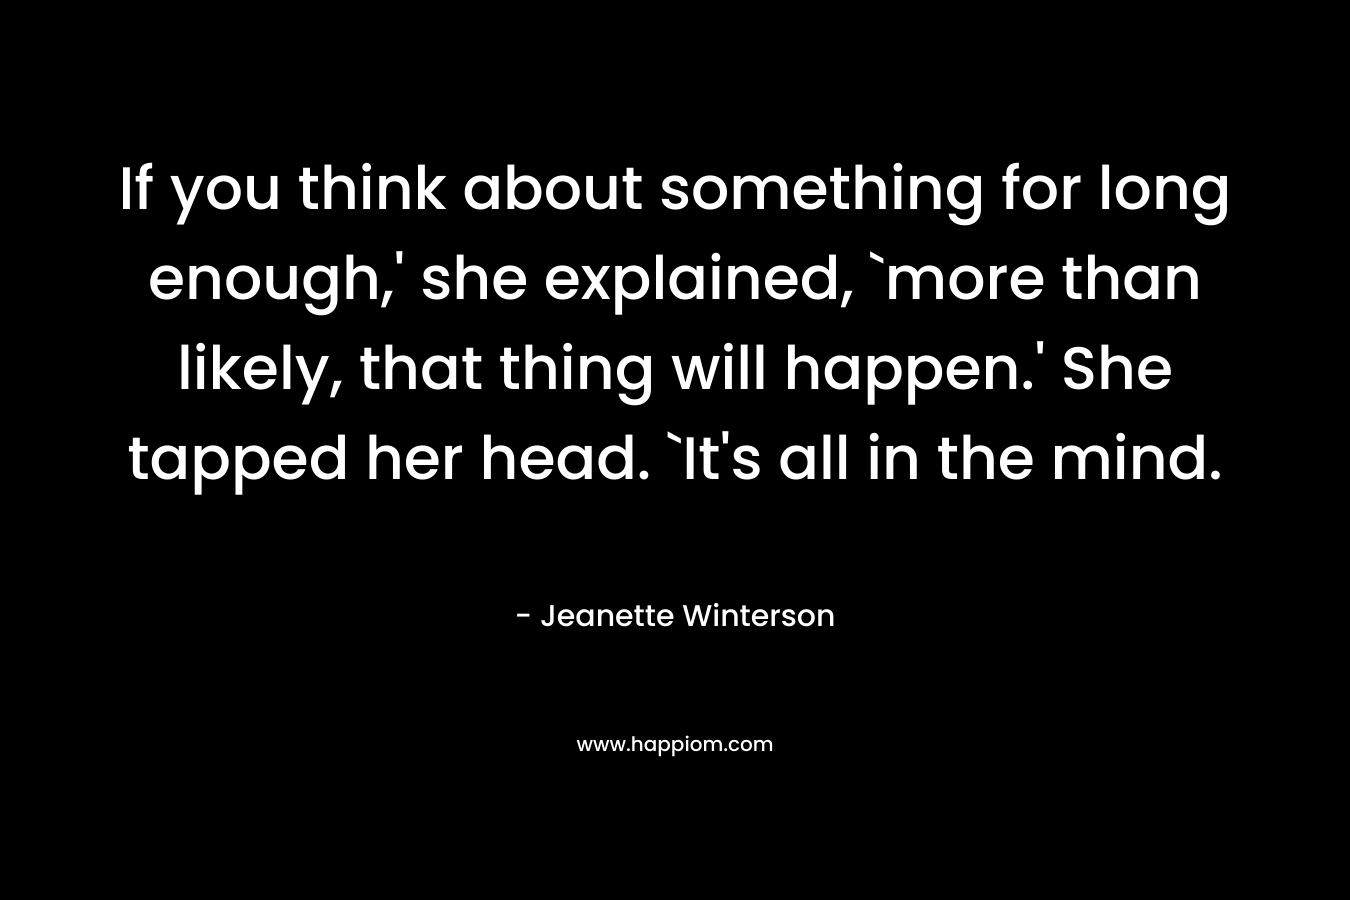 If you think about something for long enough,' she explained, `more than likely, that thing will happen.' She tapped her head. `It's all in the mind.